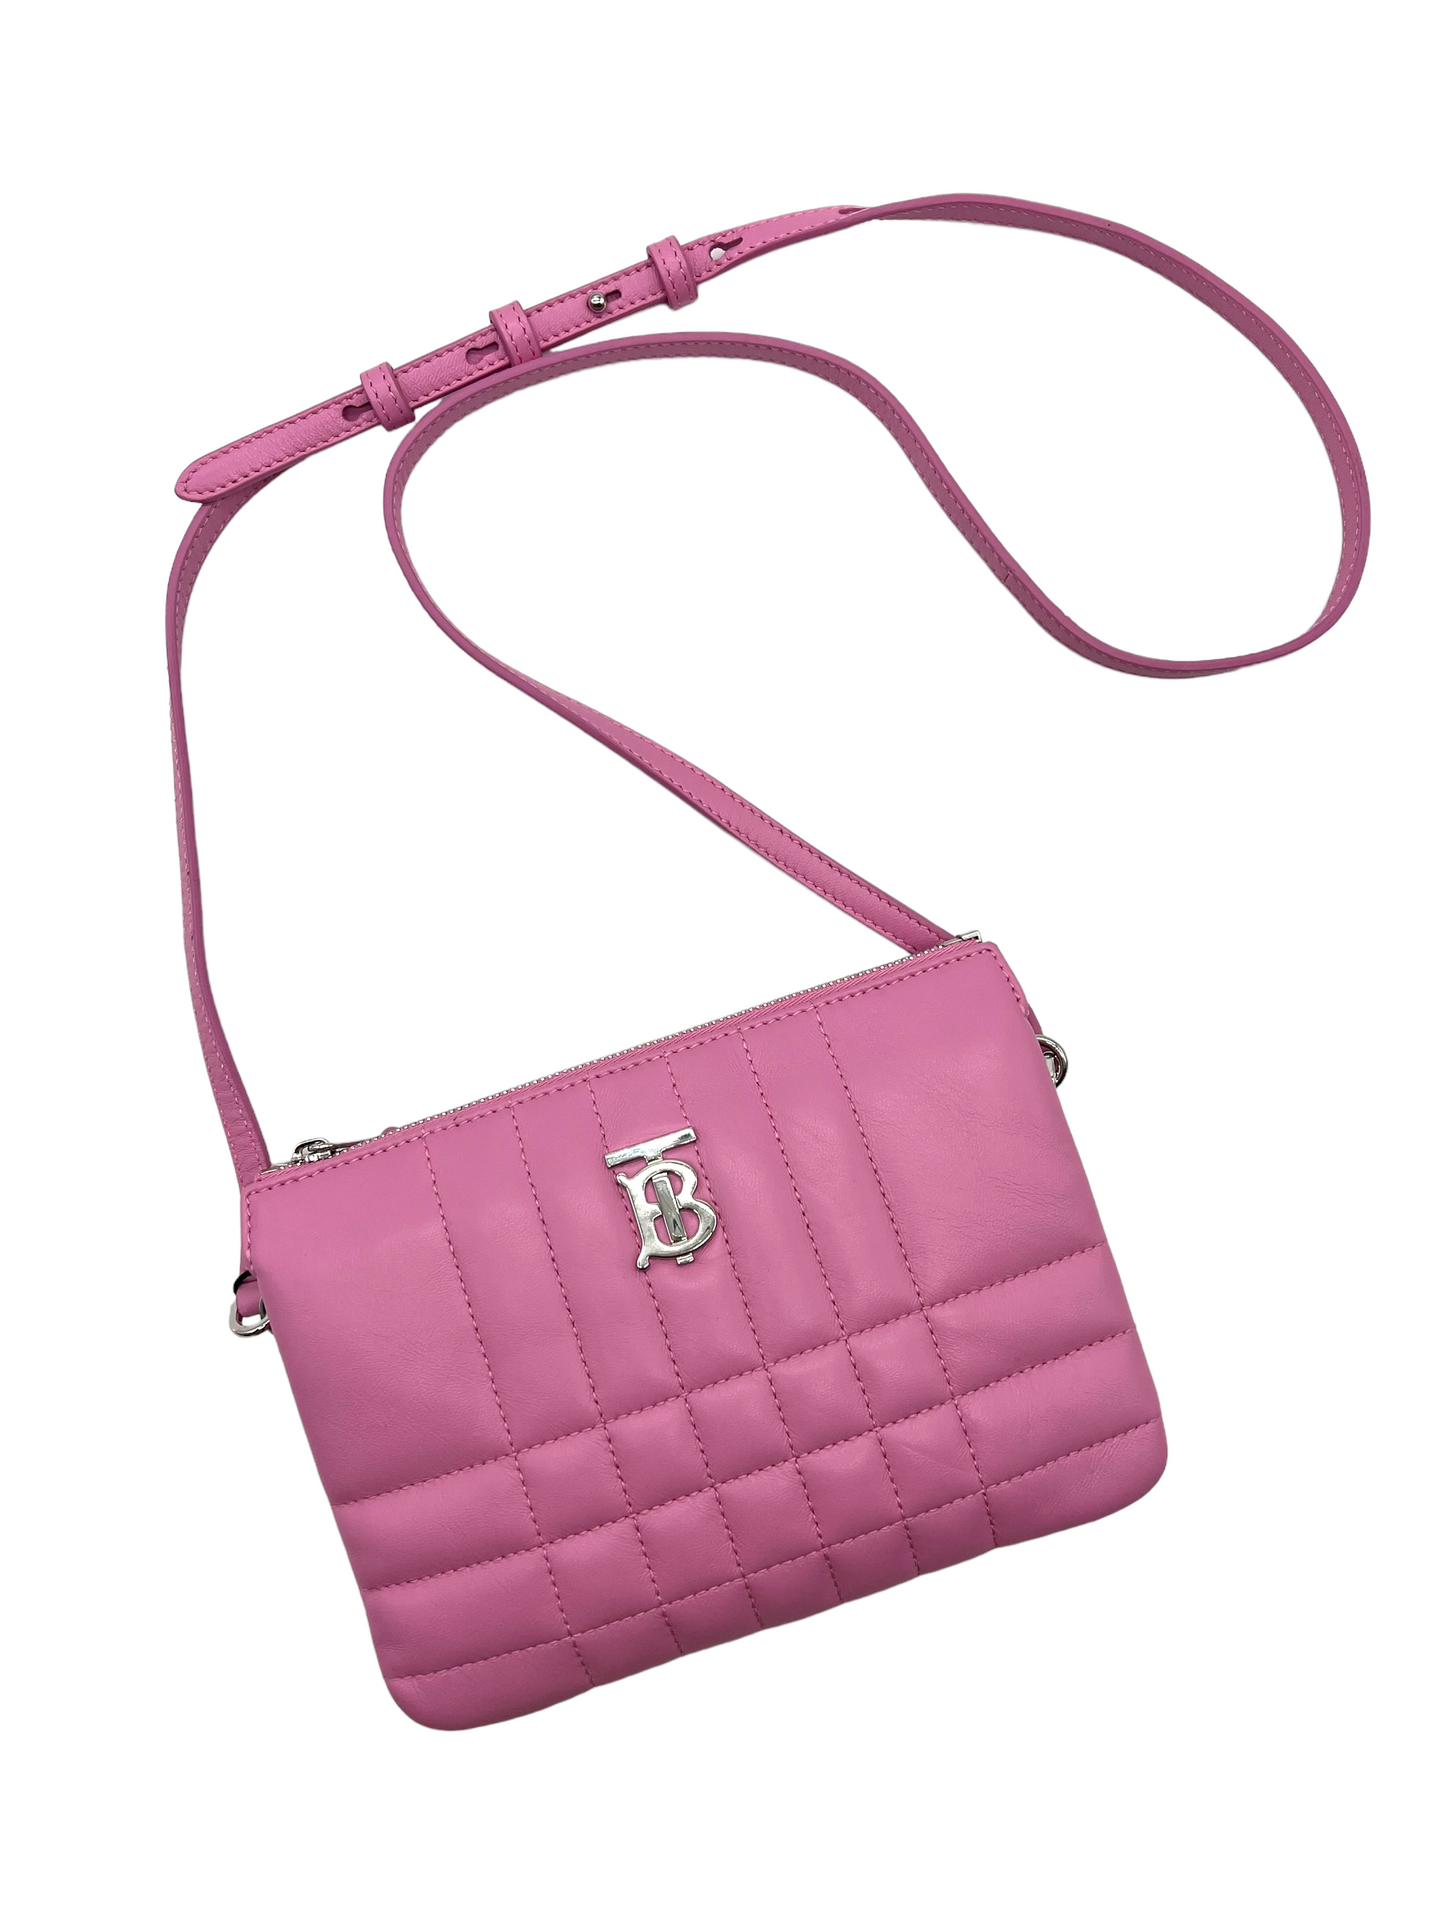 Burberry Pink Quilted Lola Crossbody